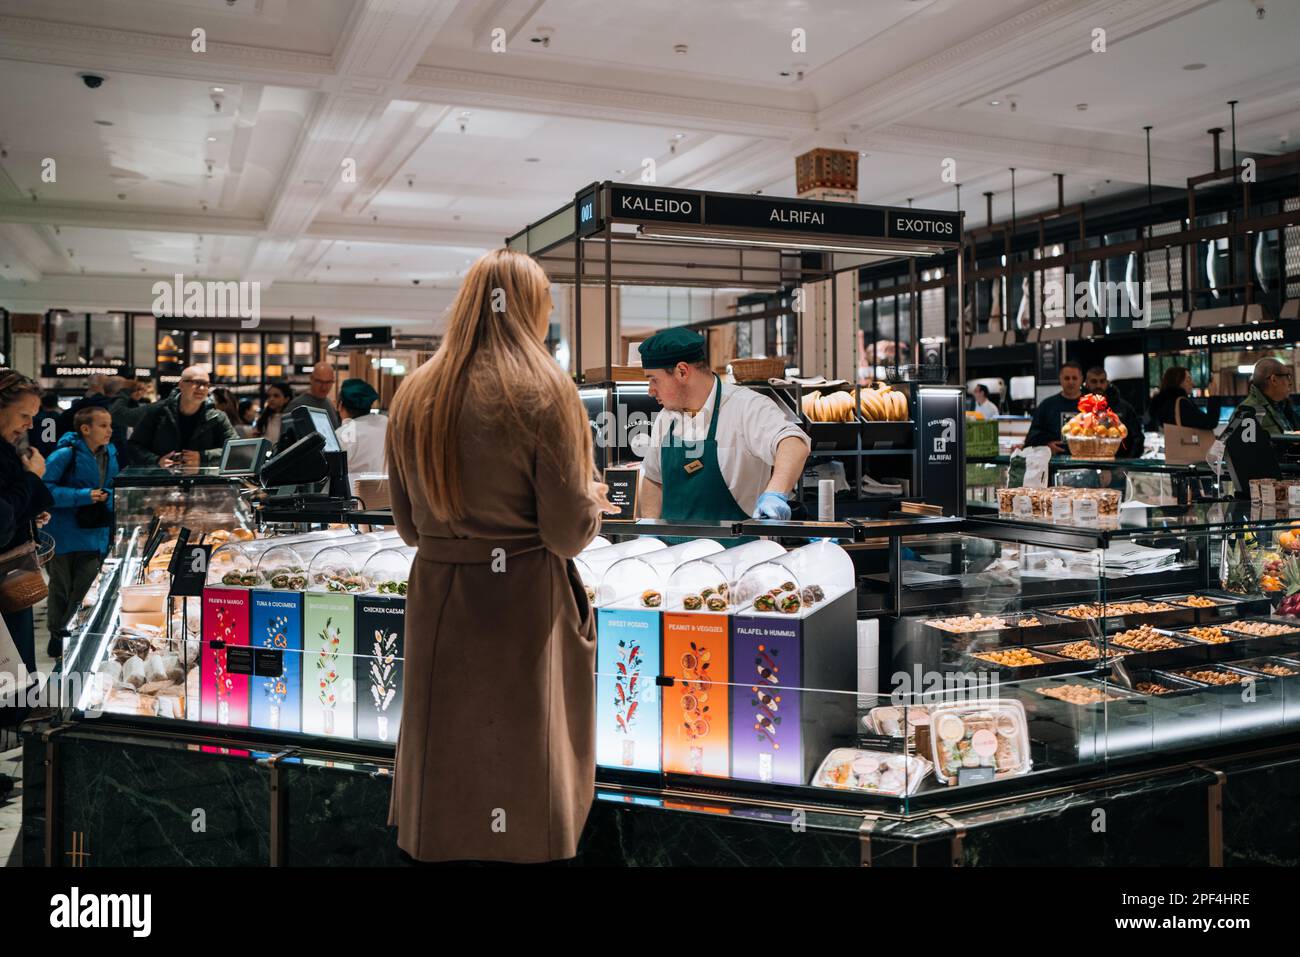 London, UK - February 21, 2023: Staff working at the food hall inside Harrods, a famous department store located on Brompton Road in Knightsbridge, Lo Stock Photo